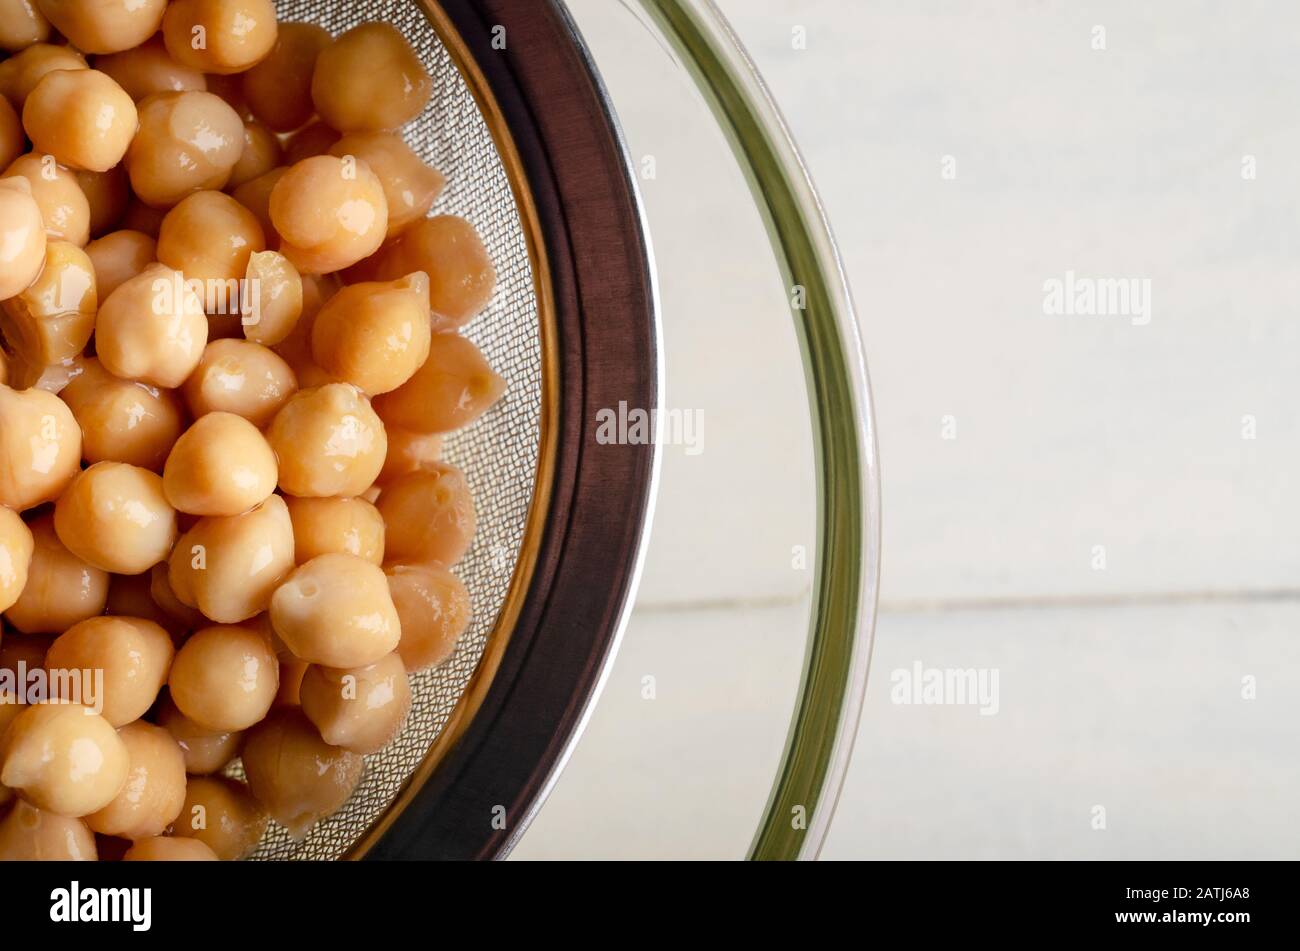 Overhead shot of chickpeas being strained through a metal sieve into a glass bowl to release aquafaba. Copy space to right. Stock Photo